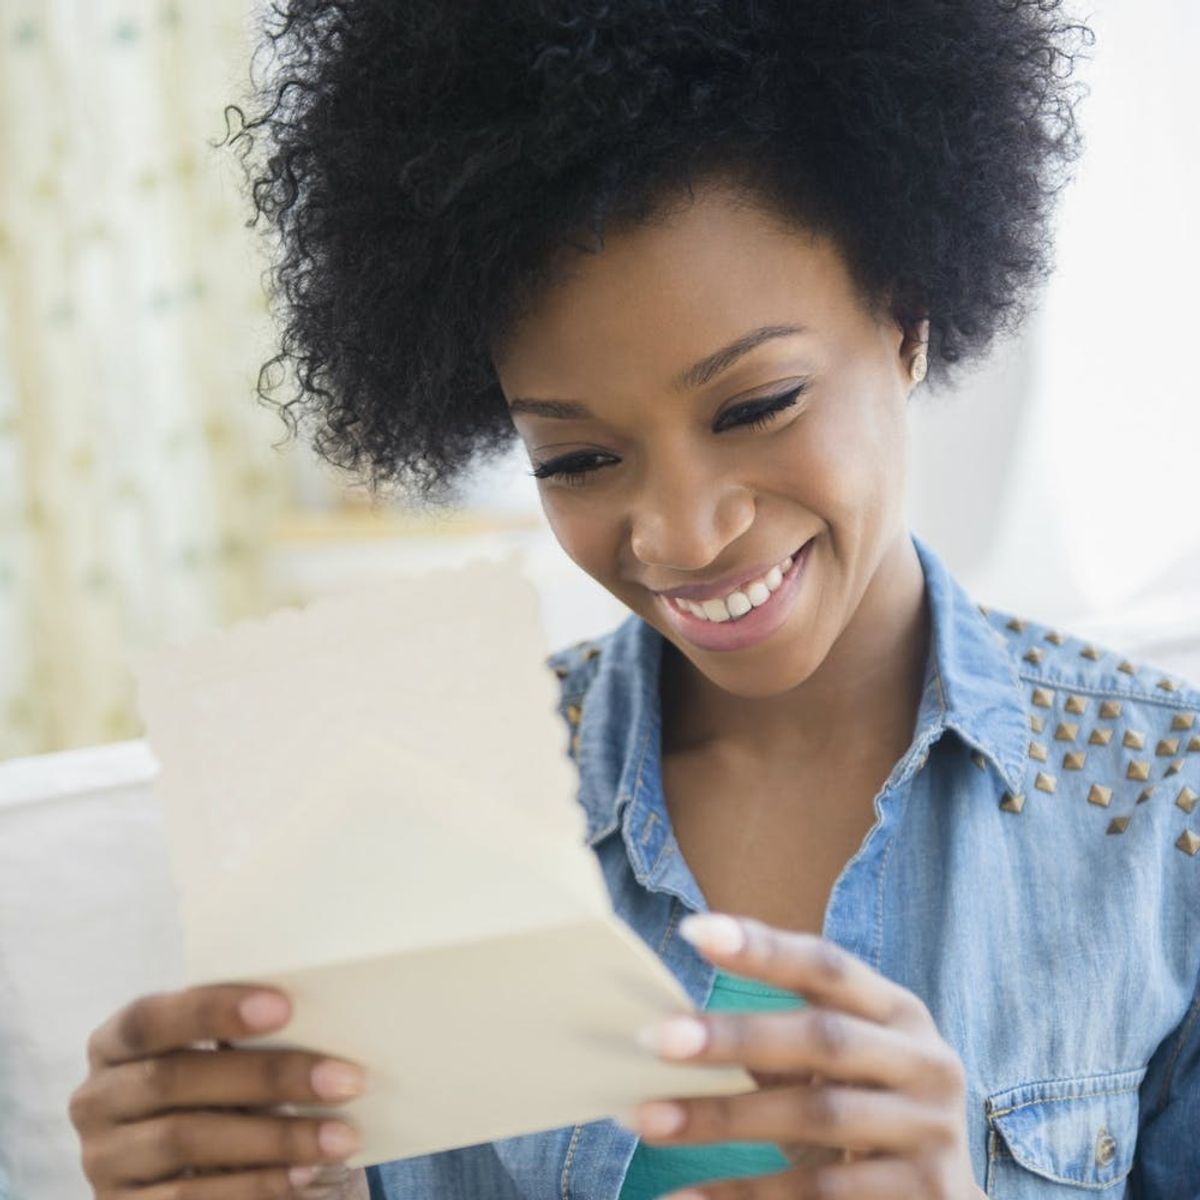 7 Ways to Keep in Touch With Your Bestie Via Snail Mail